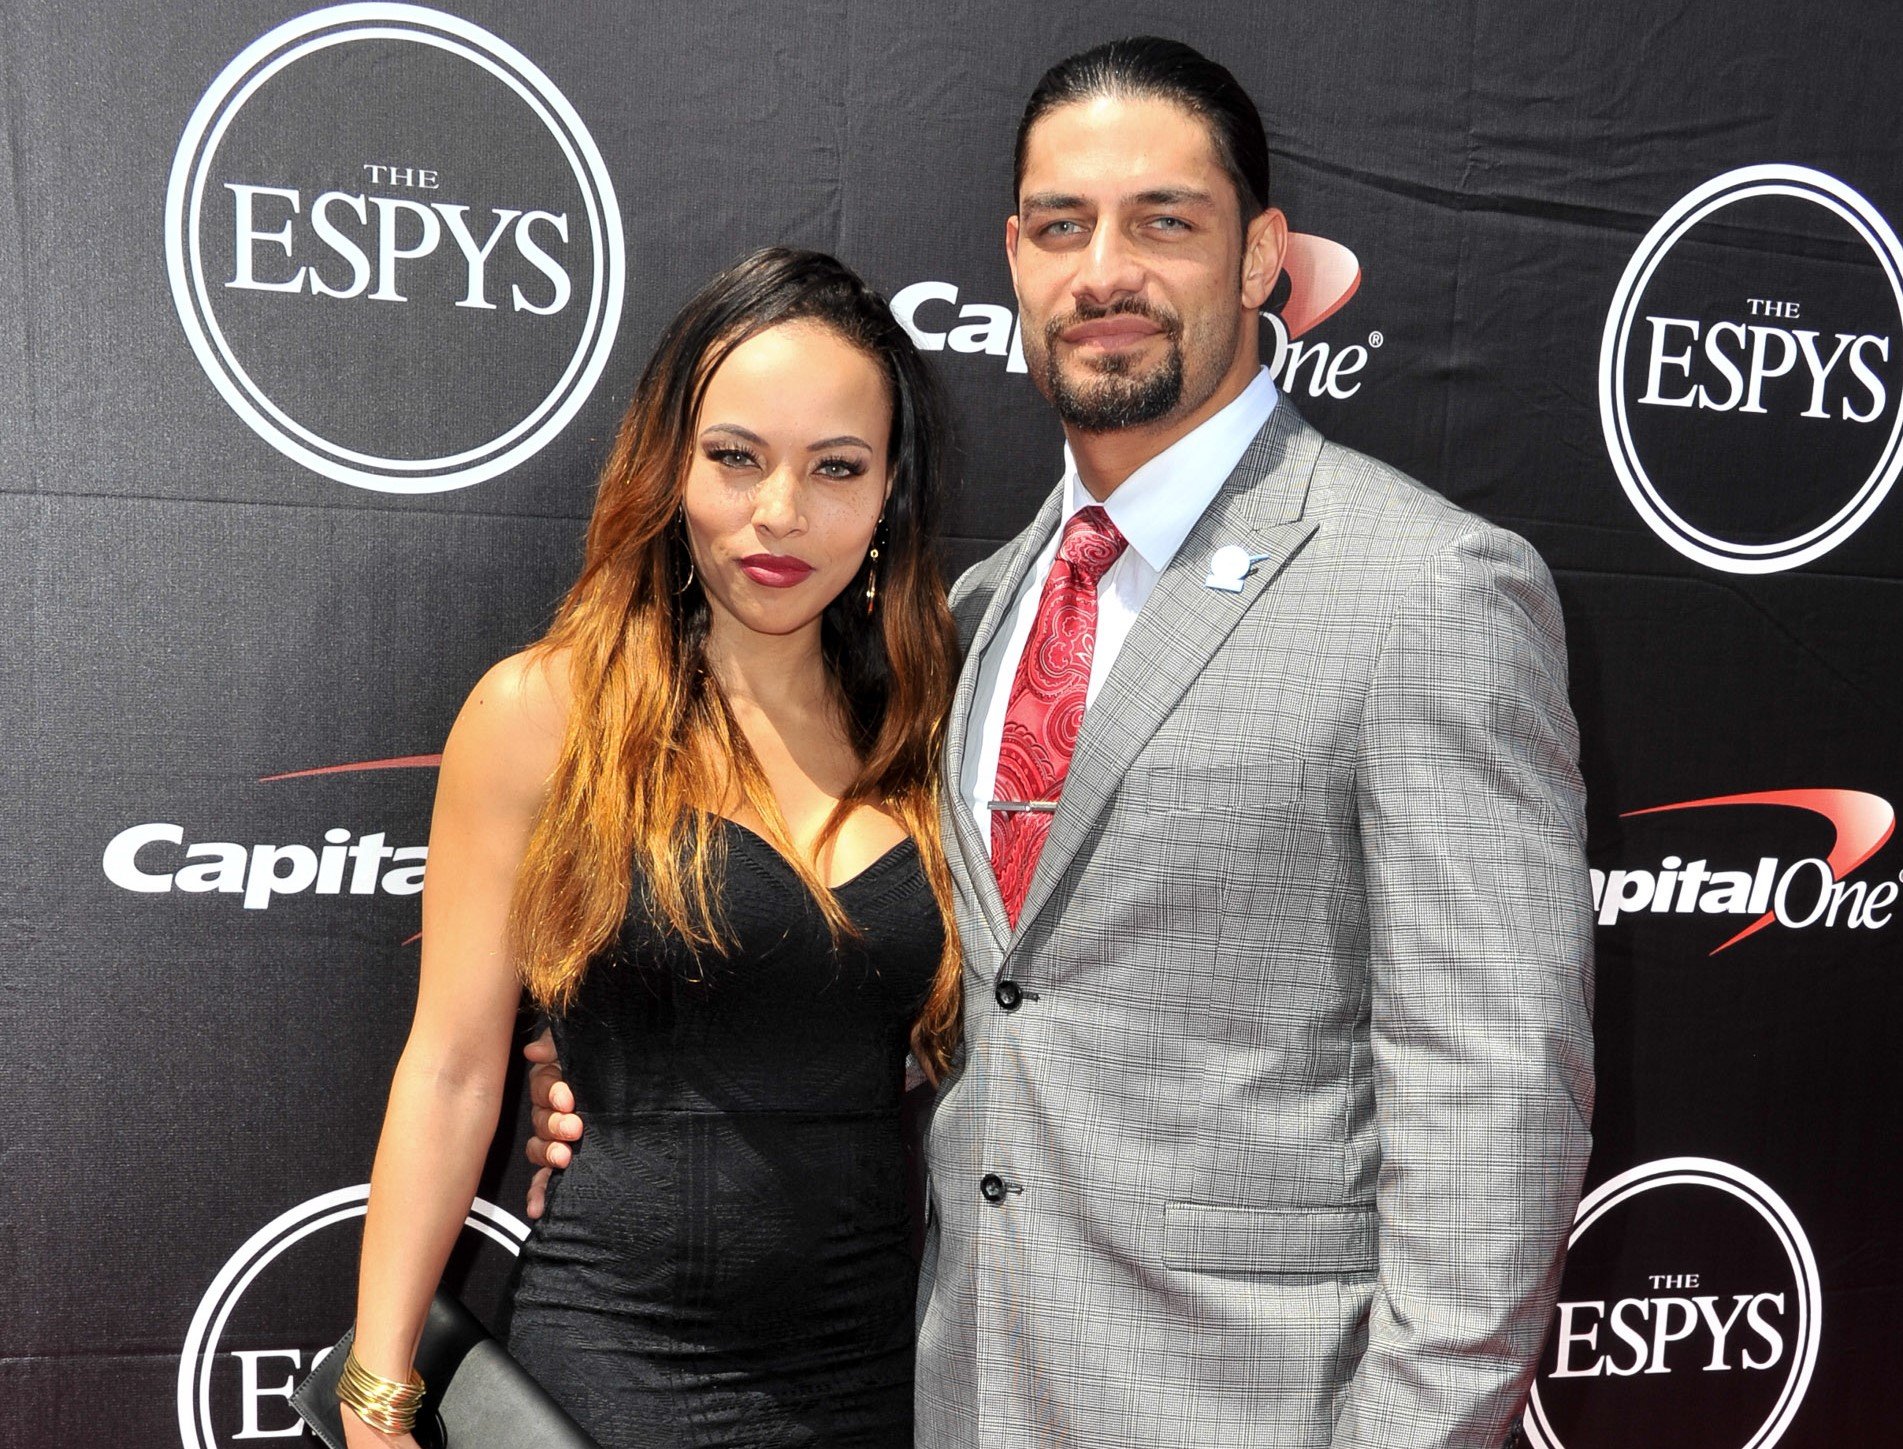 WWE wrestler Roman Reigns and wife Galina Becker at the 2015 ESPYS in Los Angeles. | Source: Getty Images